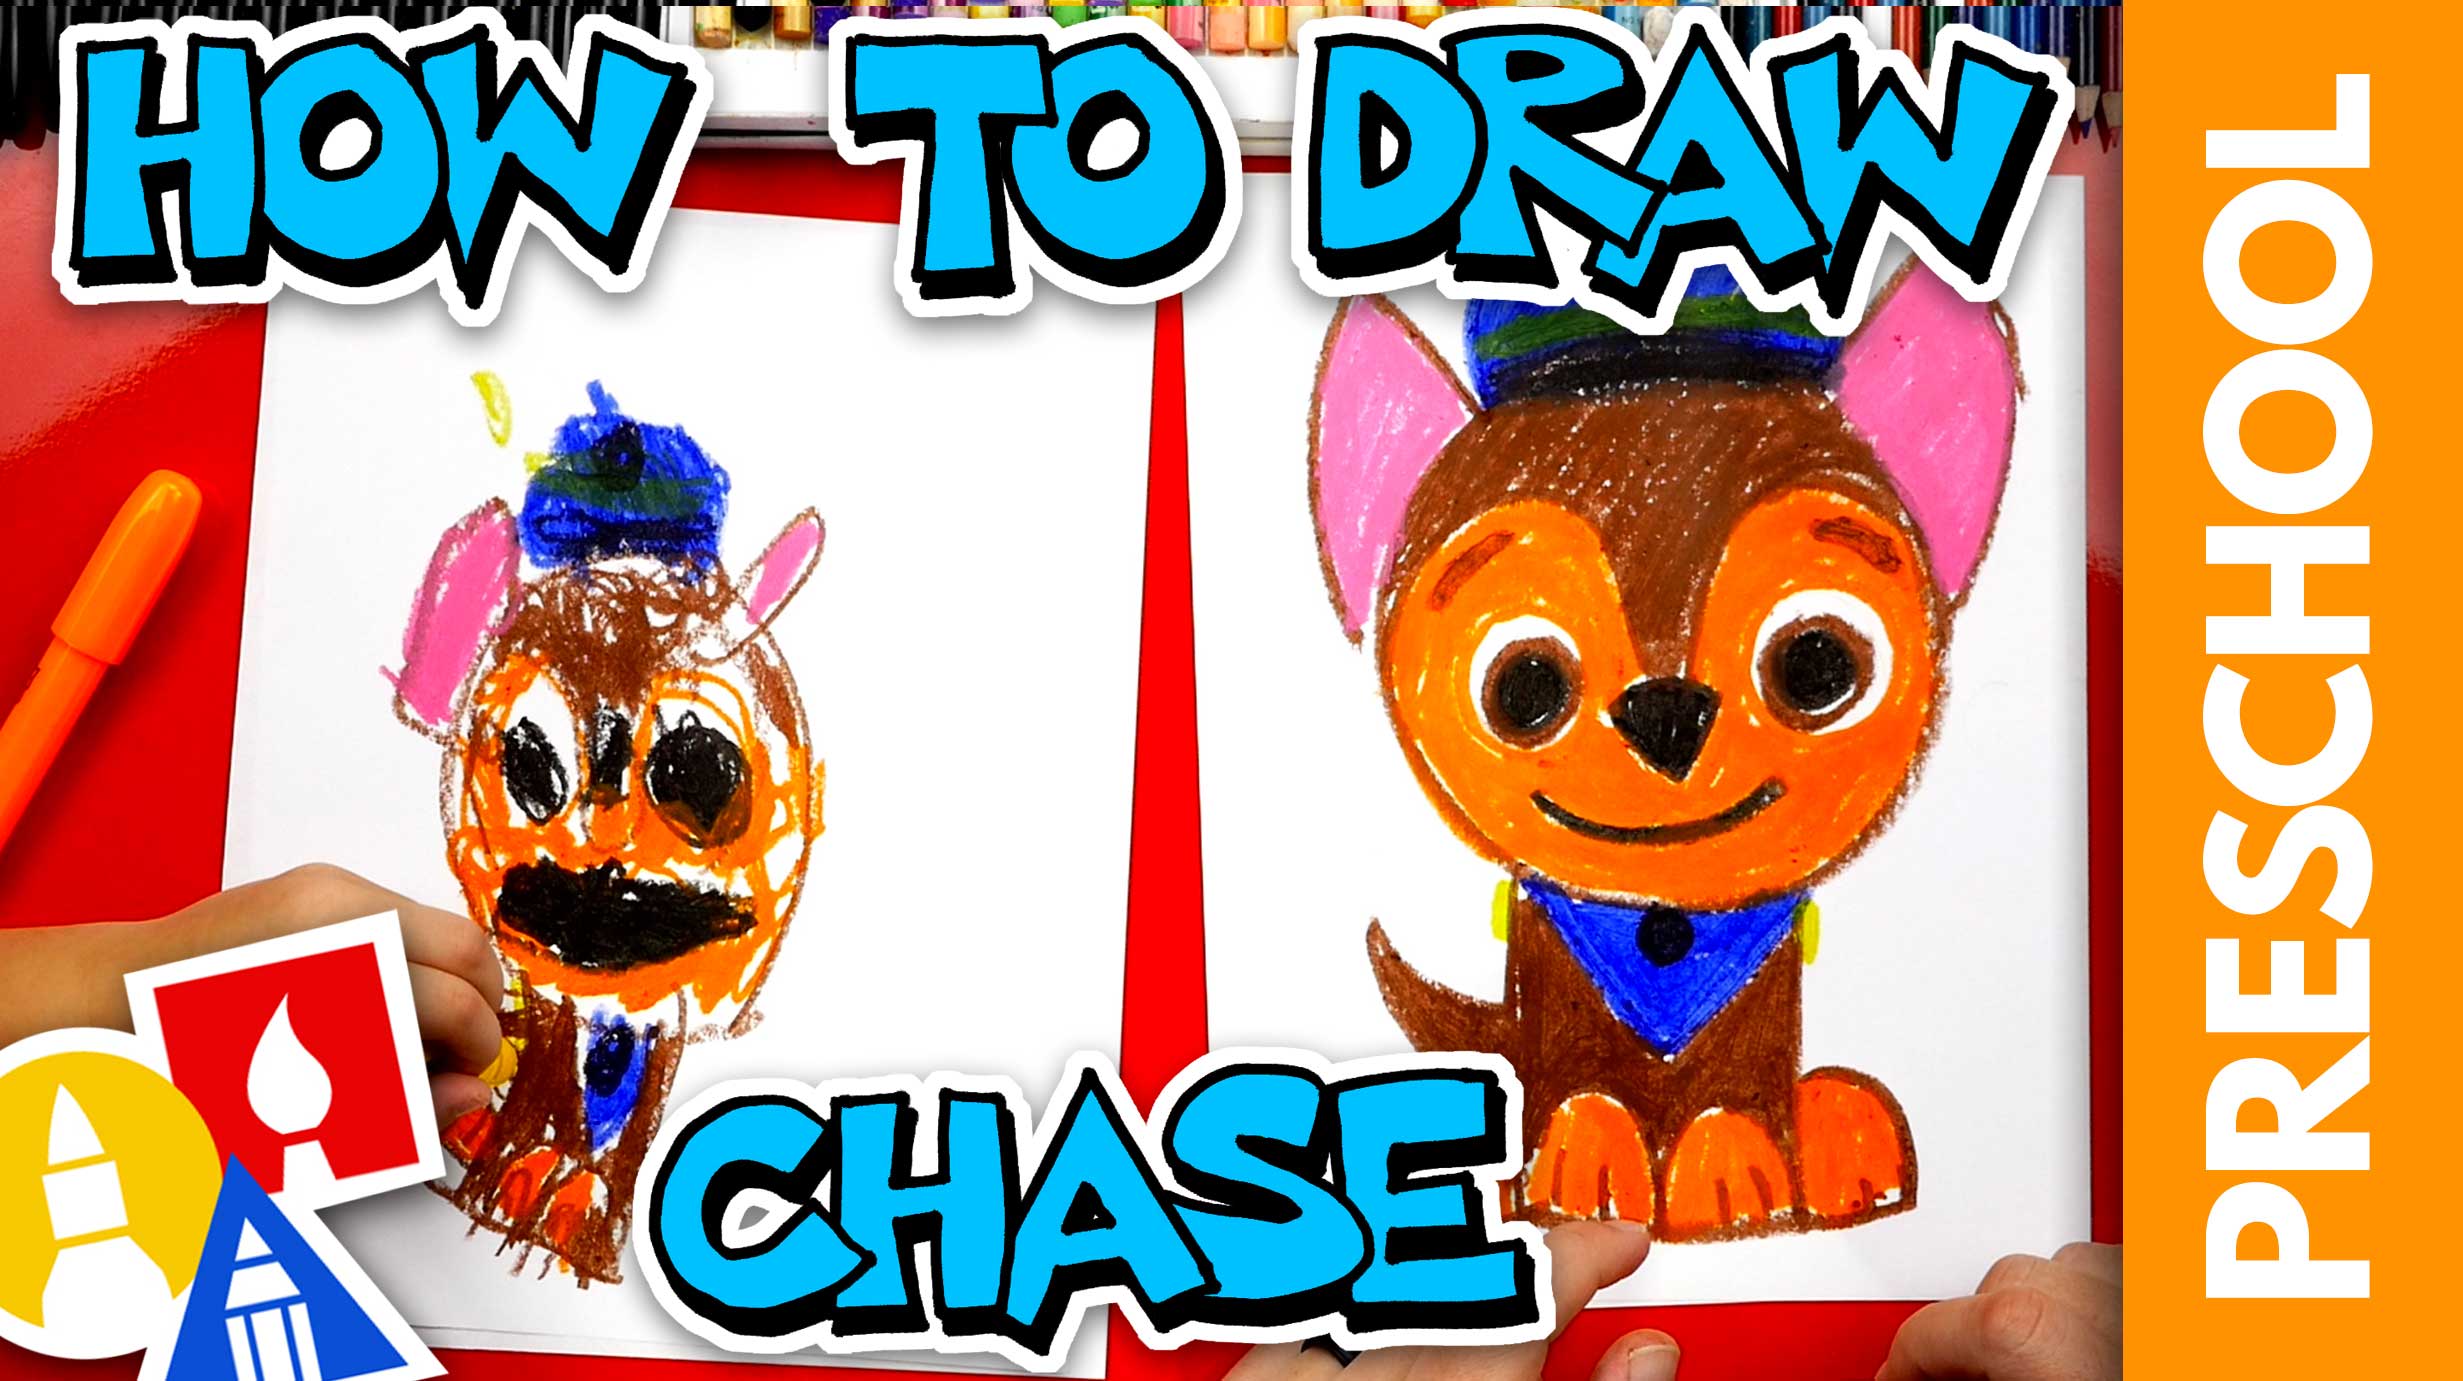 How To Draw Chase From Paw Patrol - Preschool - Art For Kids Hub